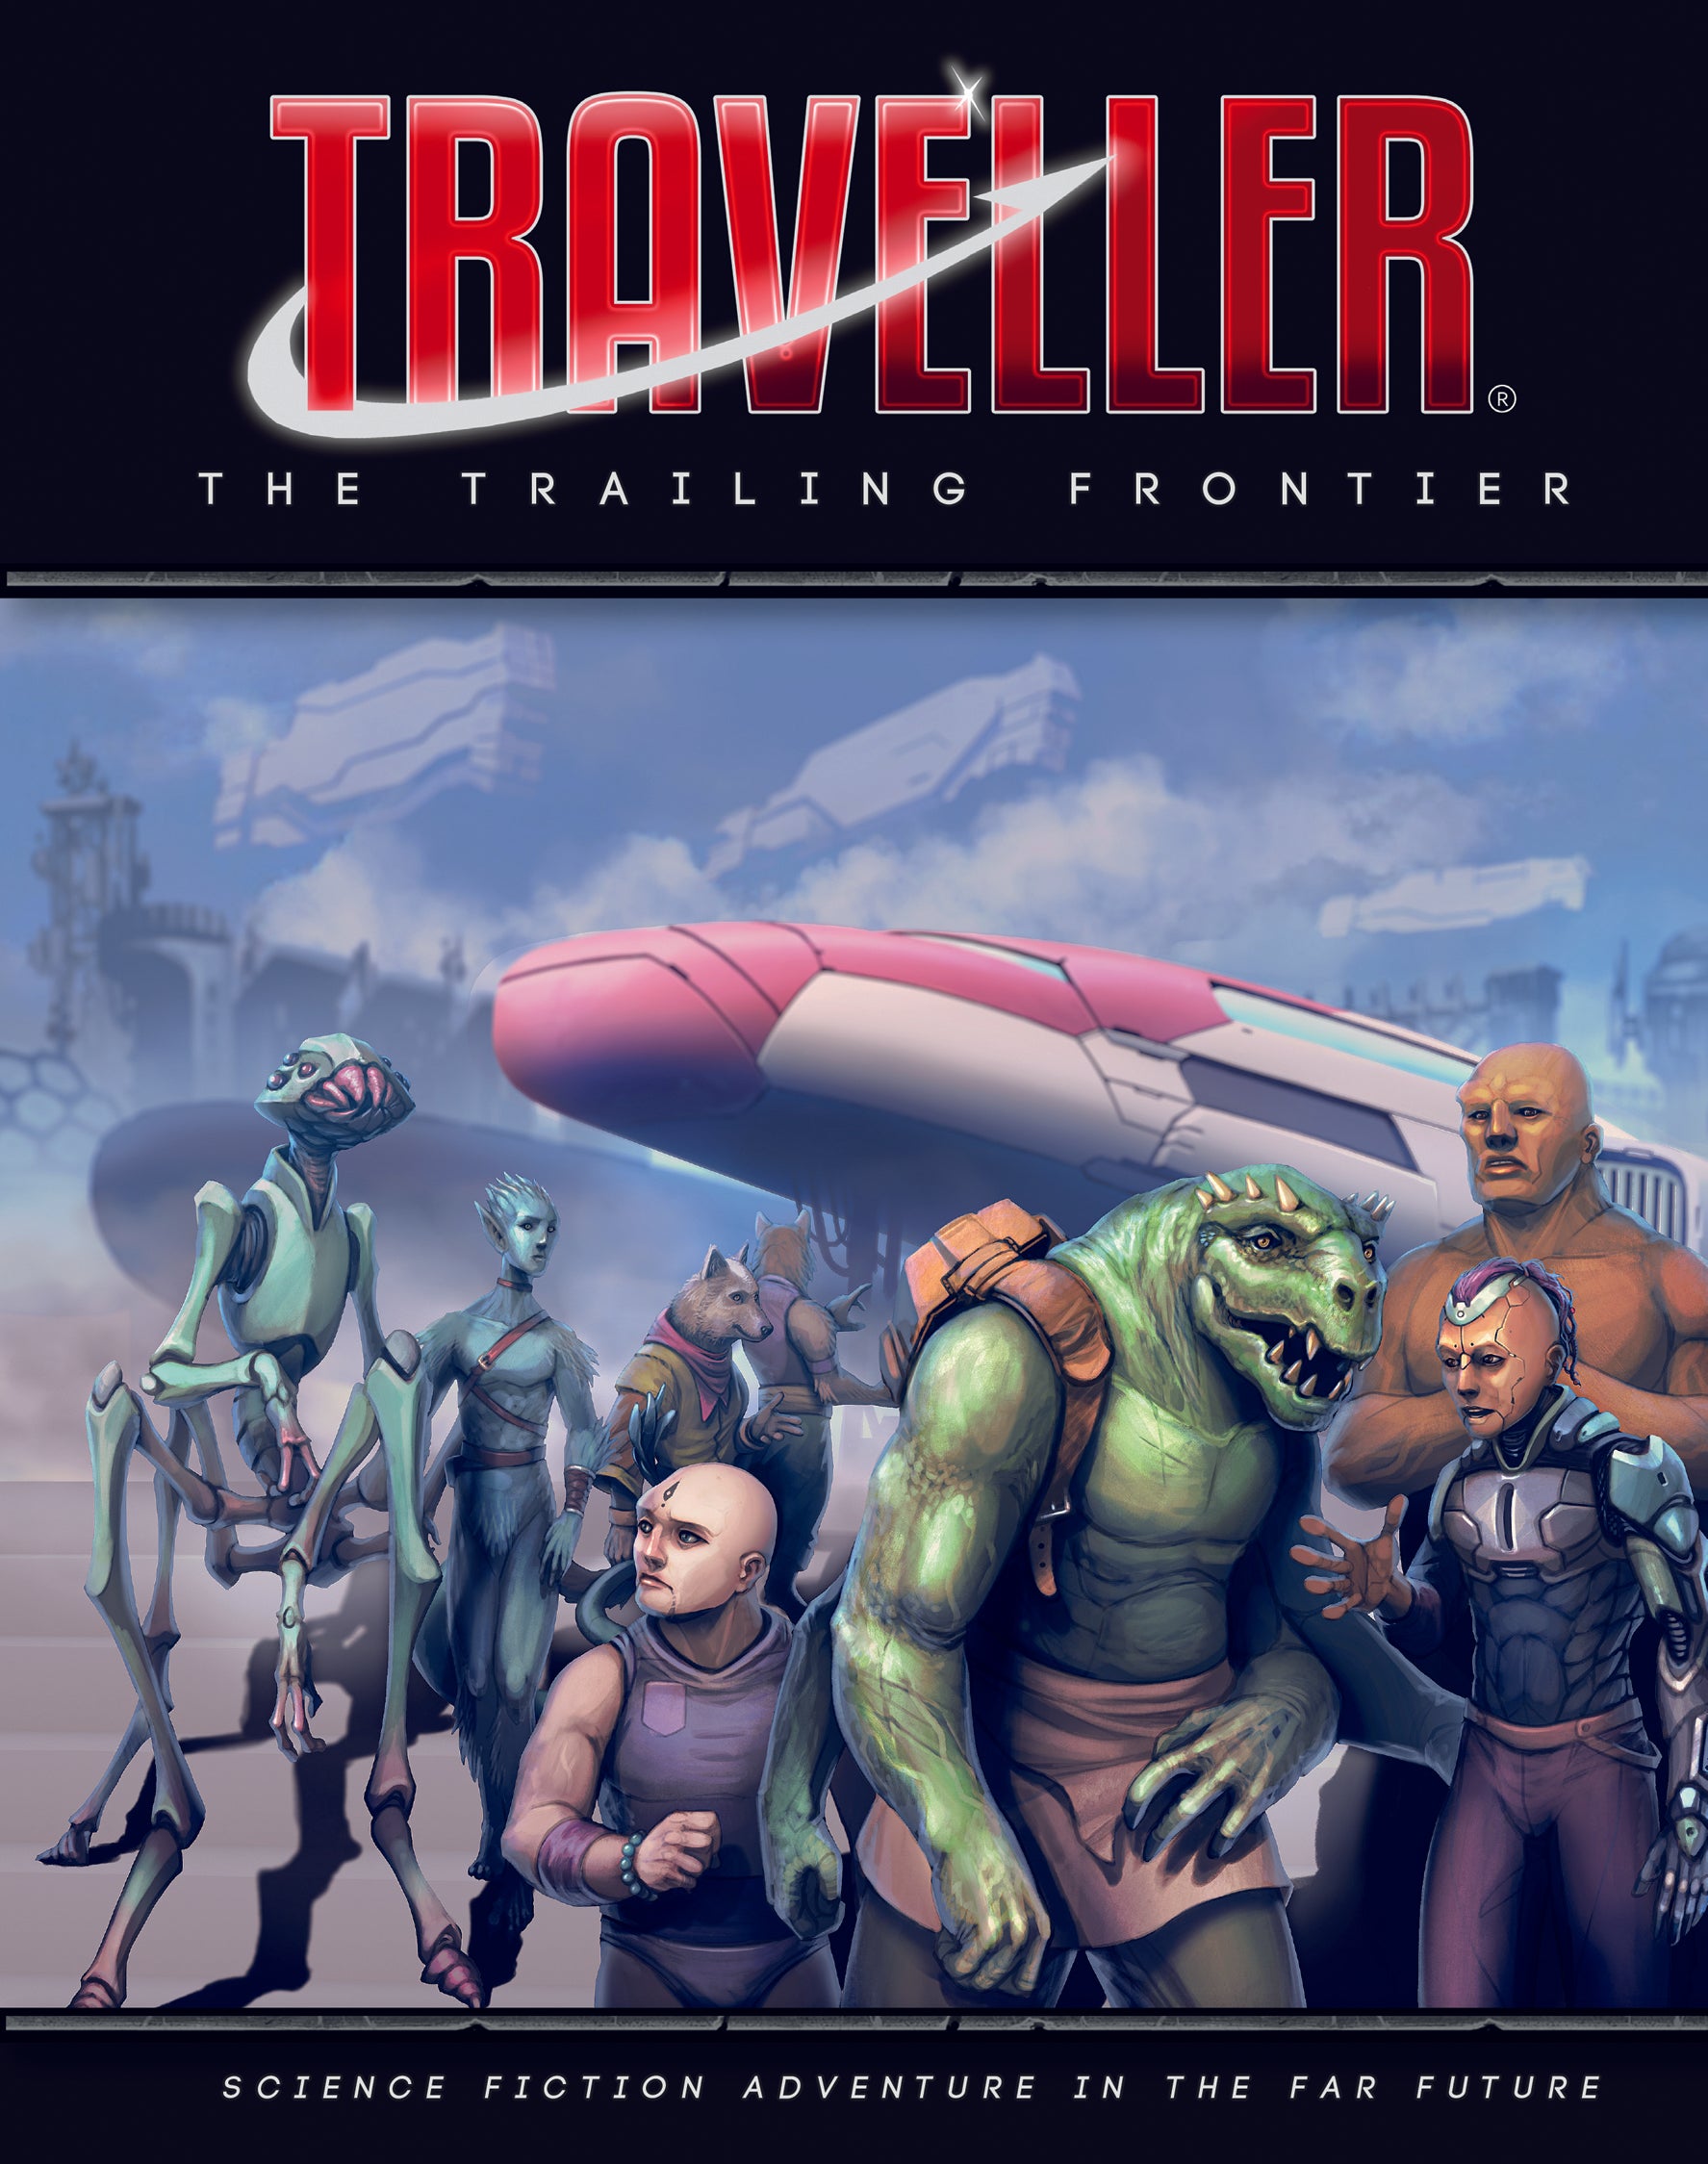 The Trailing Frontier